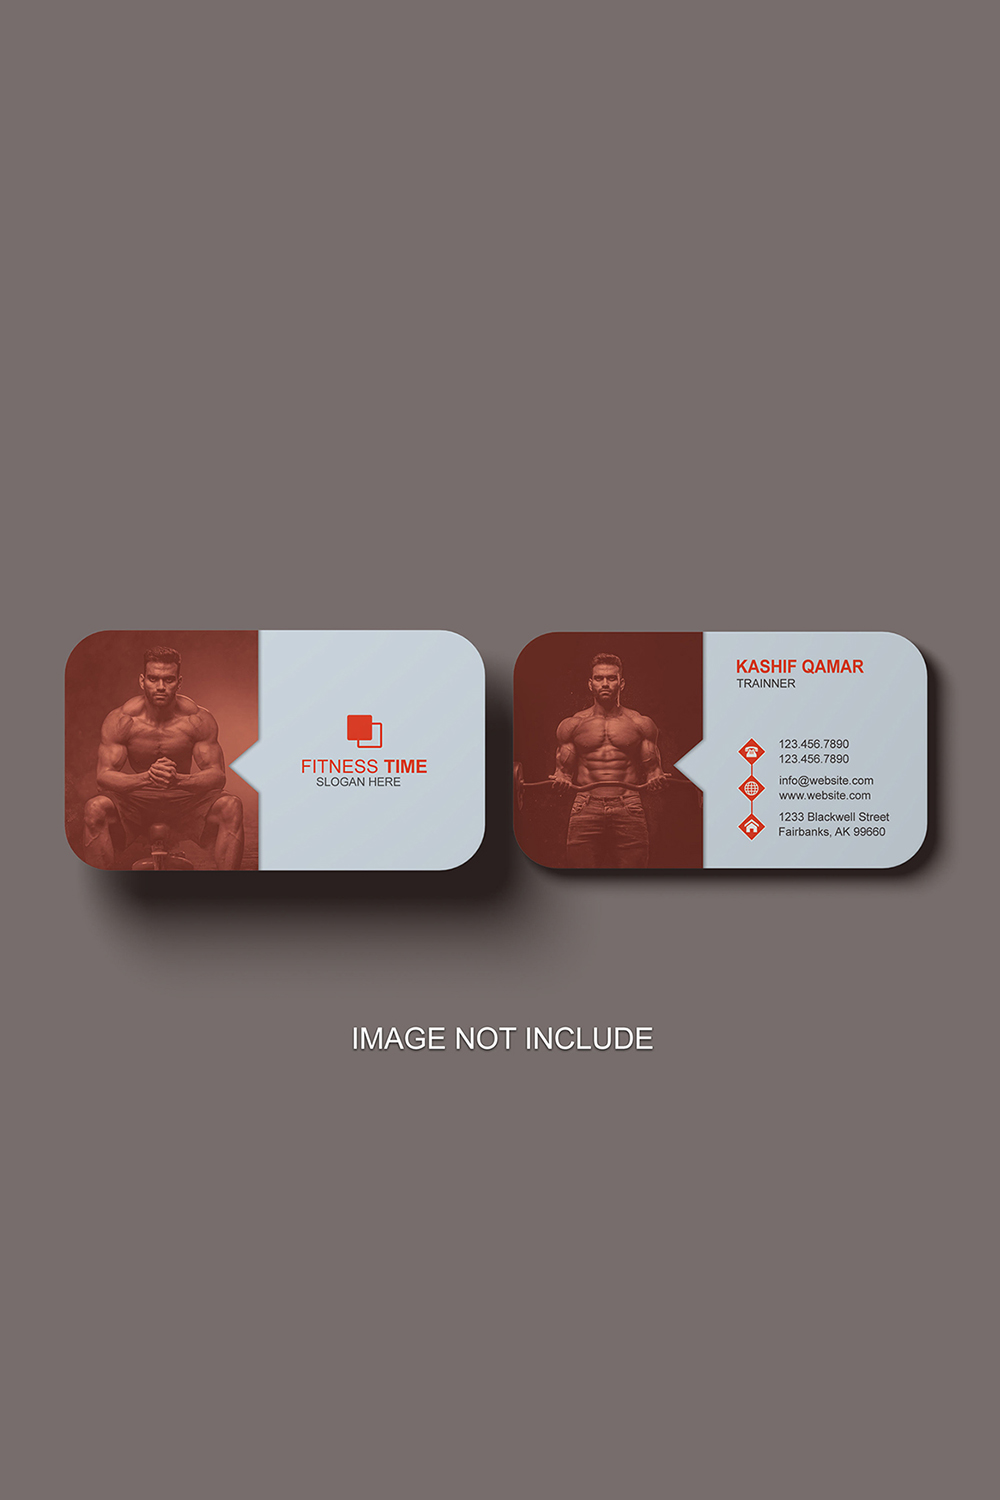 Modern Personal Trainer Business Card Template Pinterest image.